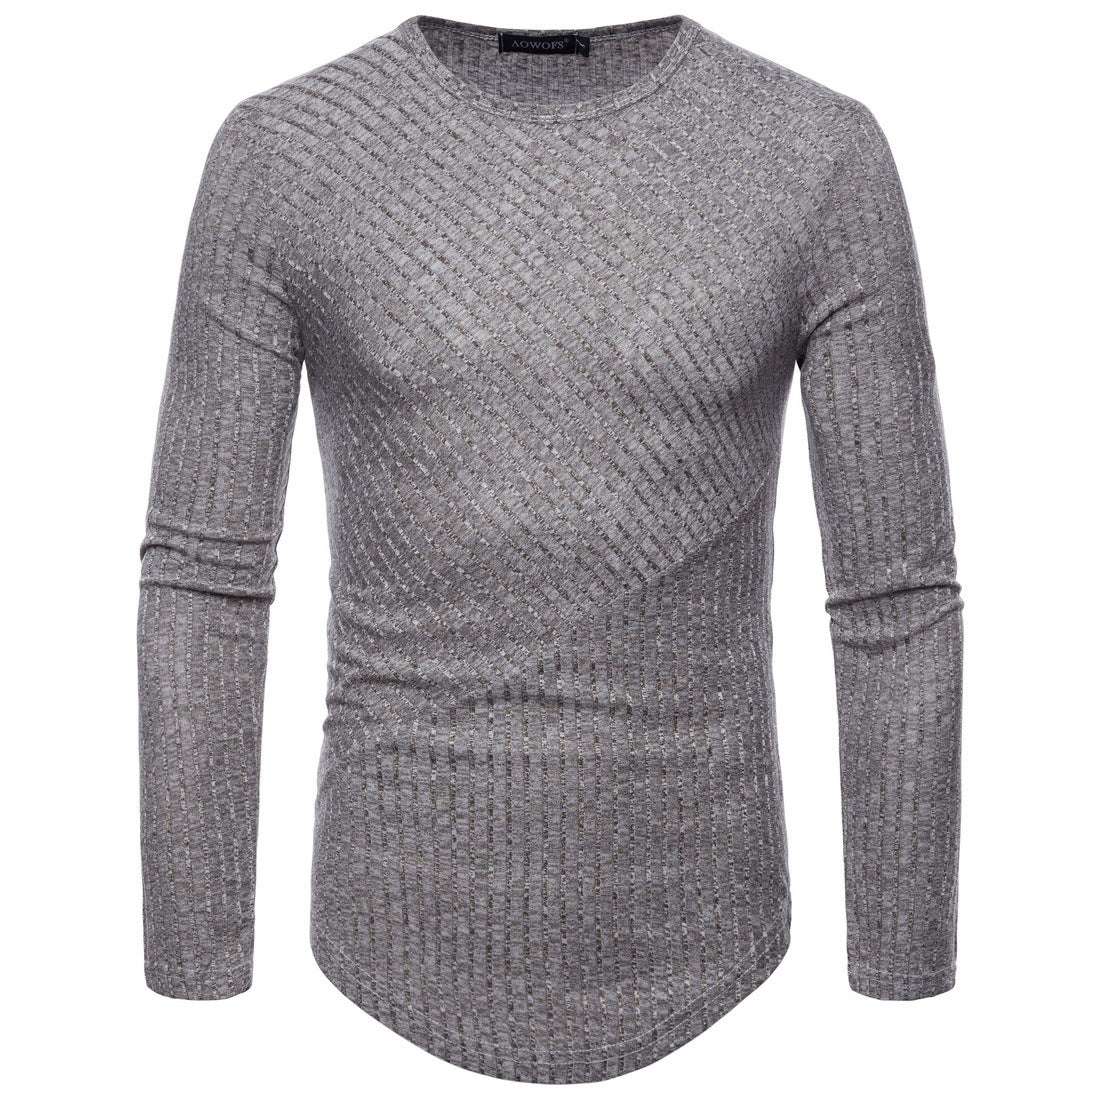 Knitted T-shirt, Long-sleeved Men's Top, Trendy Men's Top - available at Sparq Mart